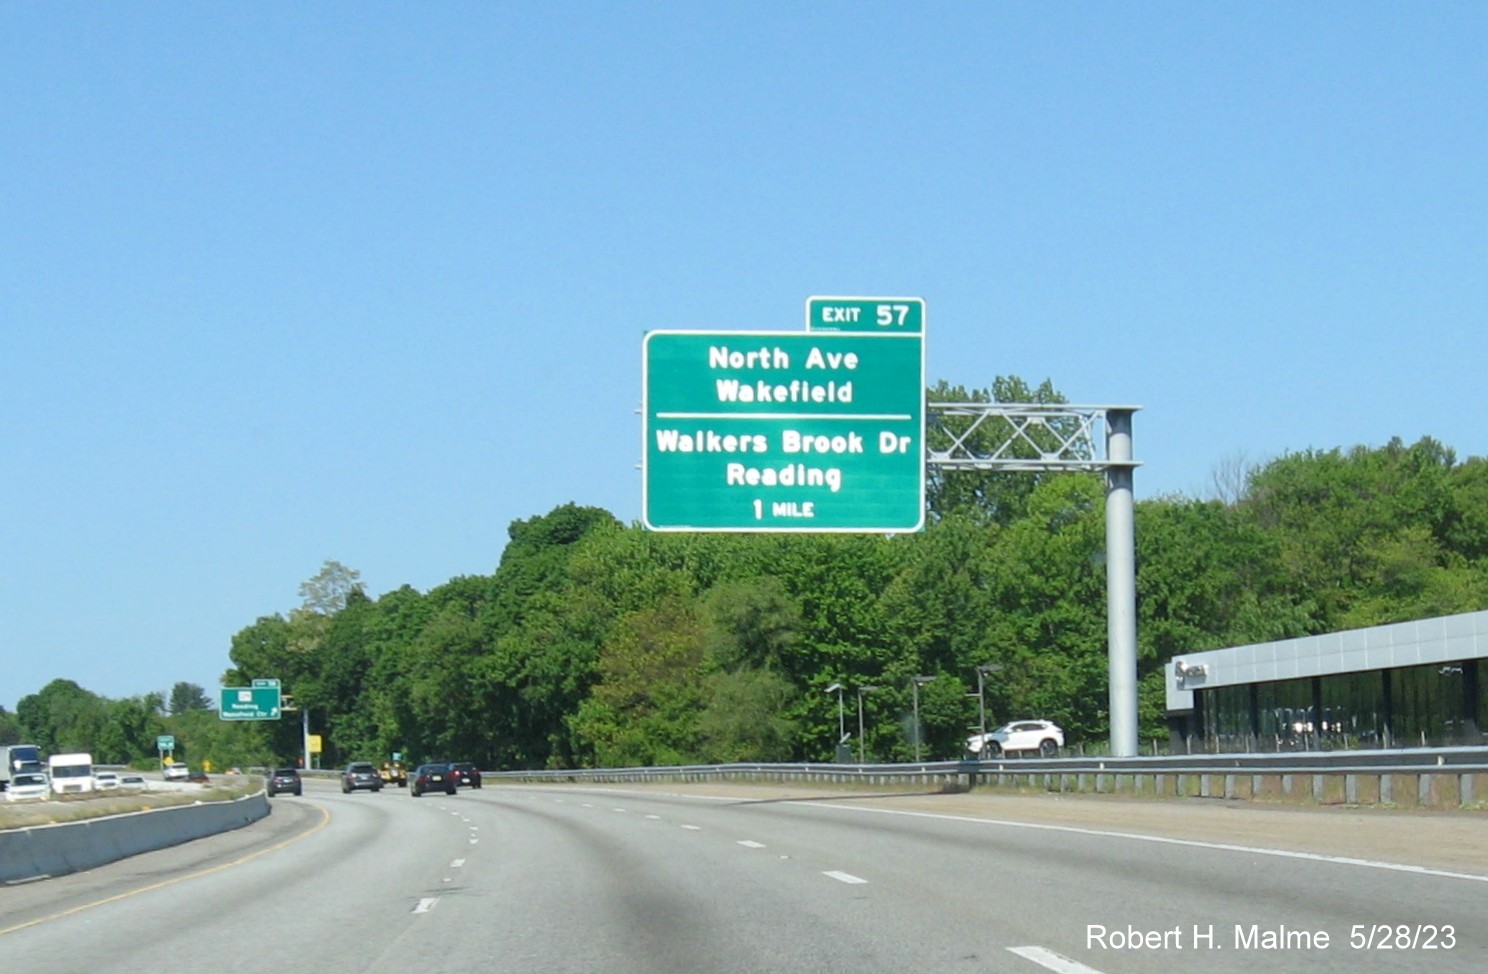 Image of recently placed 1 Mile advance overhead sign for North Avenue/Walkers Brook Drive exit on I-95/MA 128 South in Wakefield, May 2023